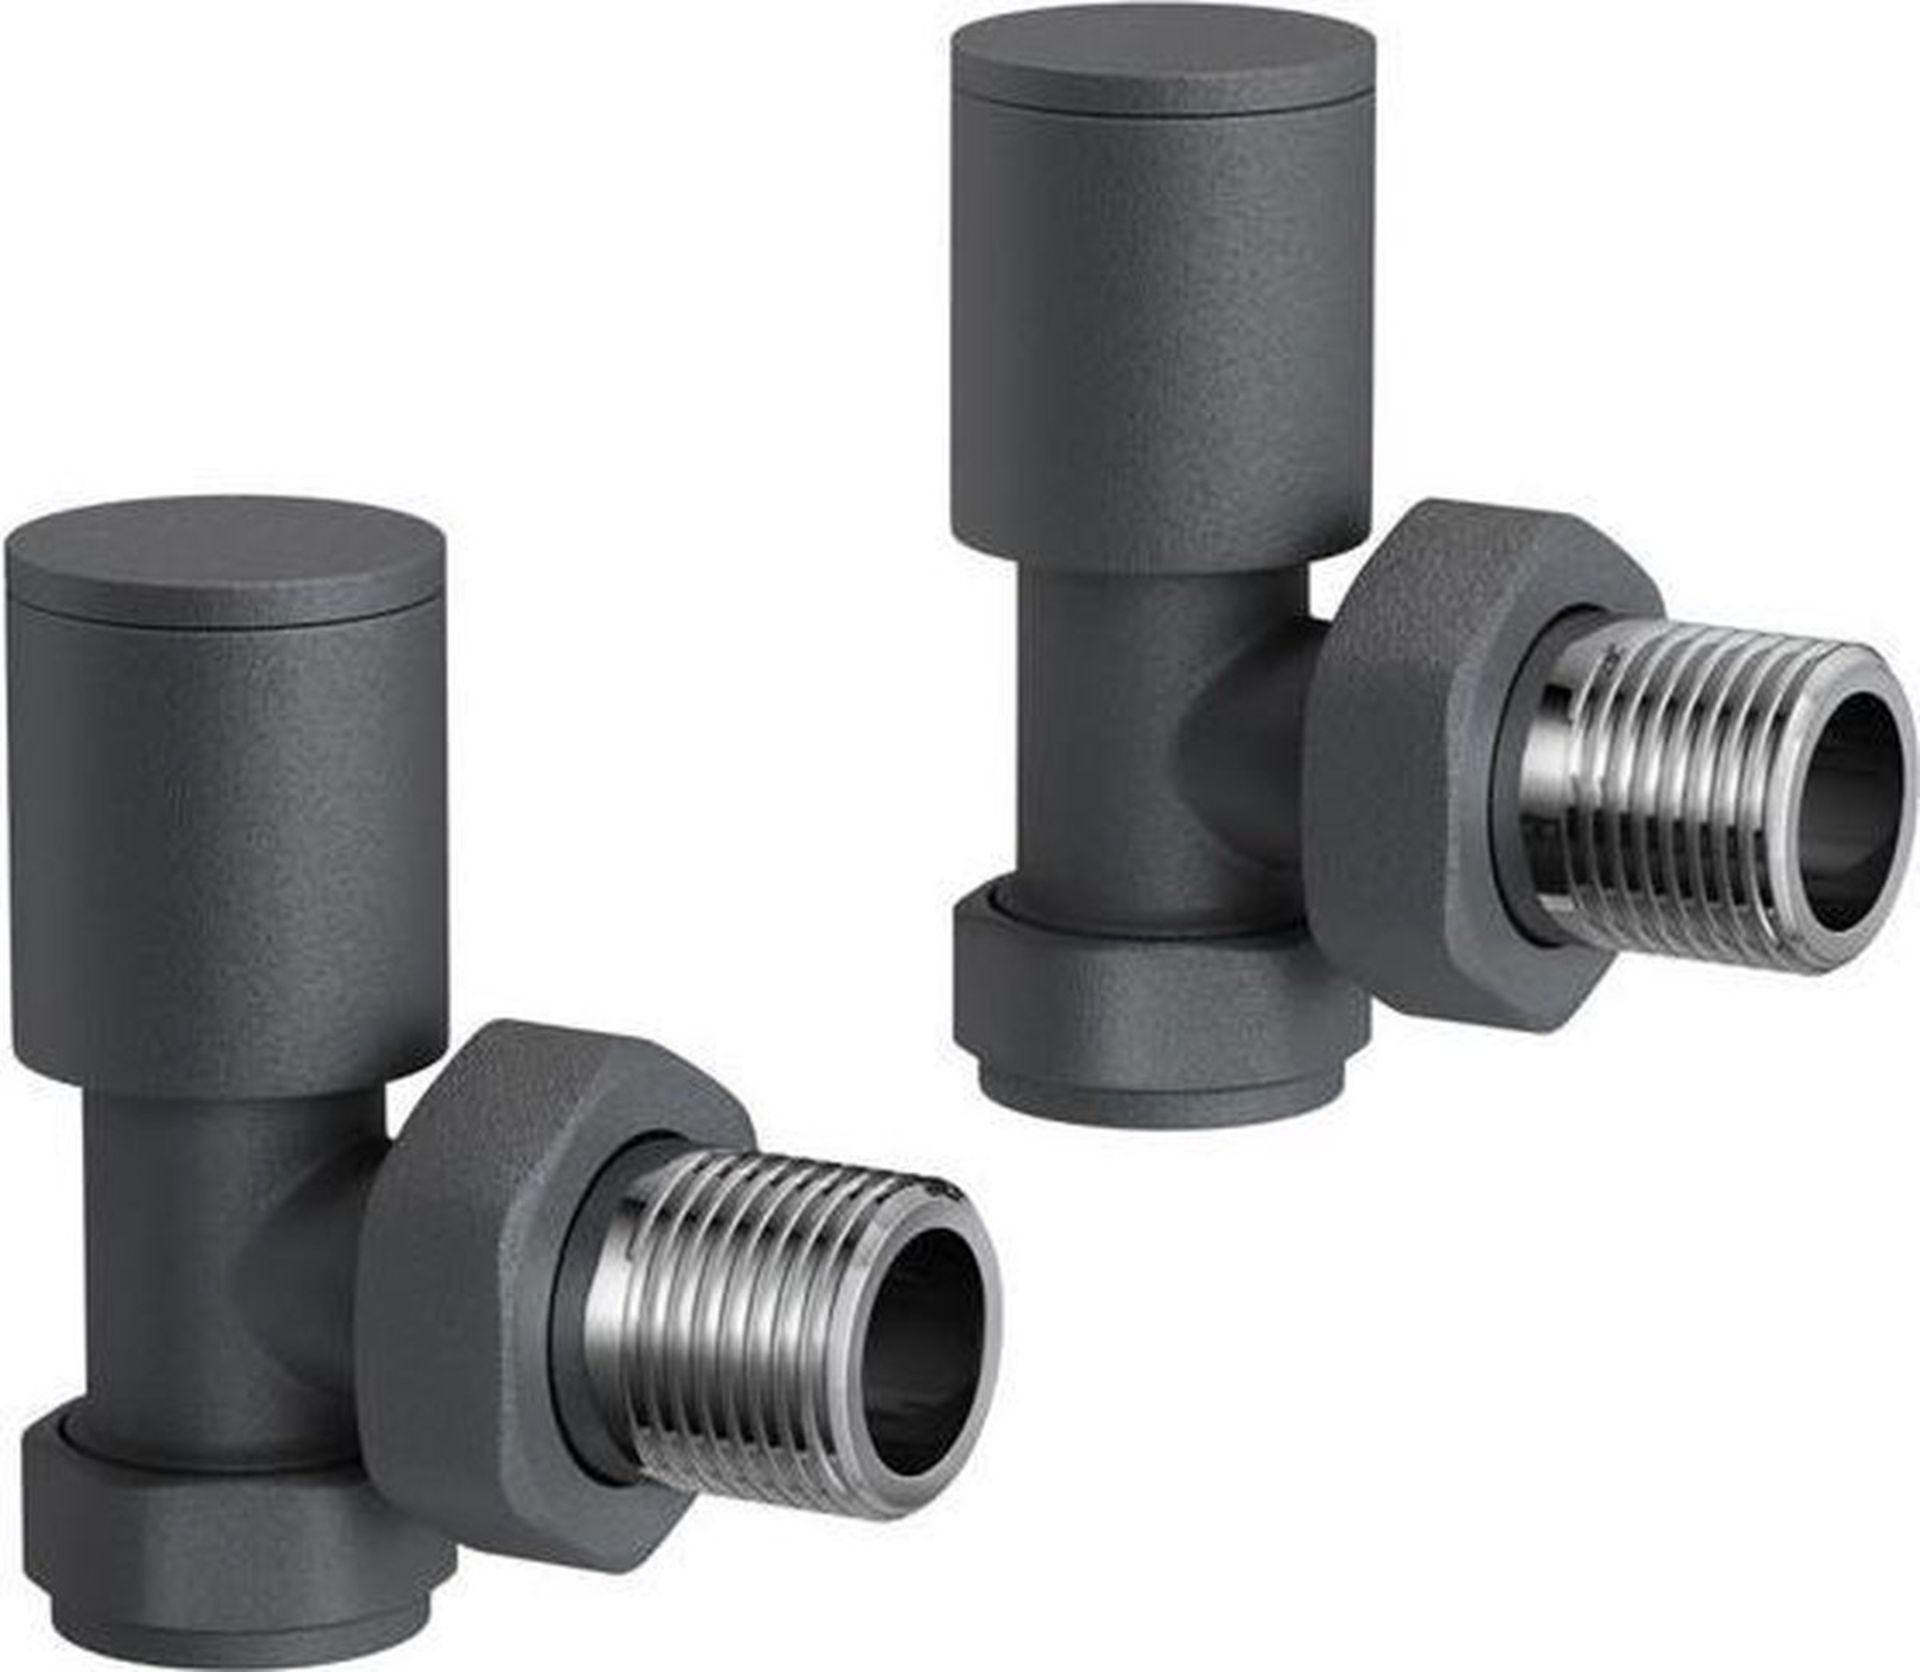 NEW & BOXED 15 mm Standard Connection Square Angled Anthracite Radiator Valves. RA03A. Compli...